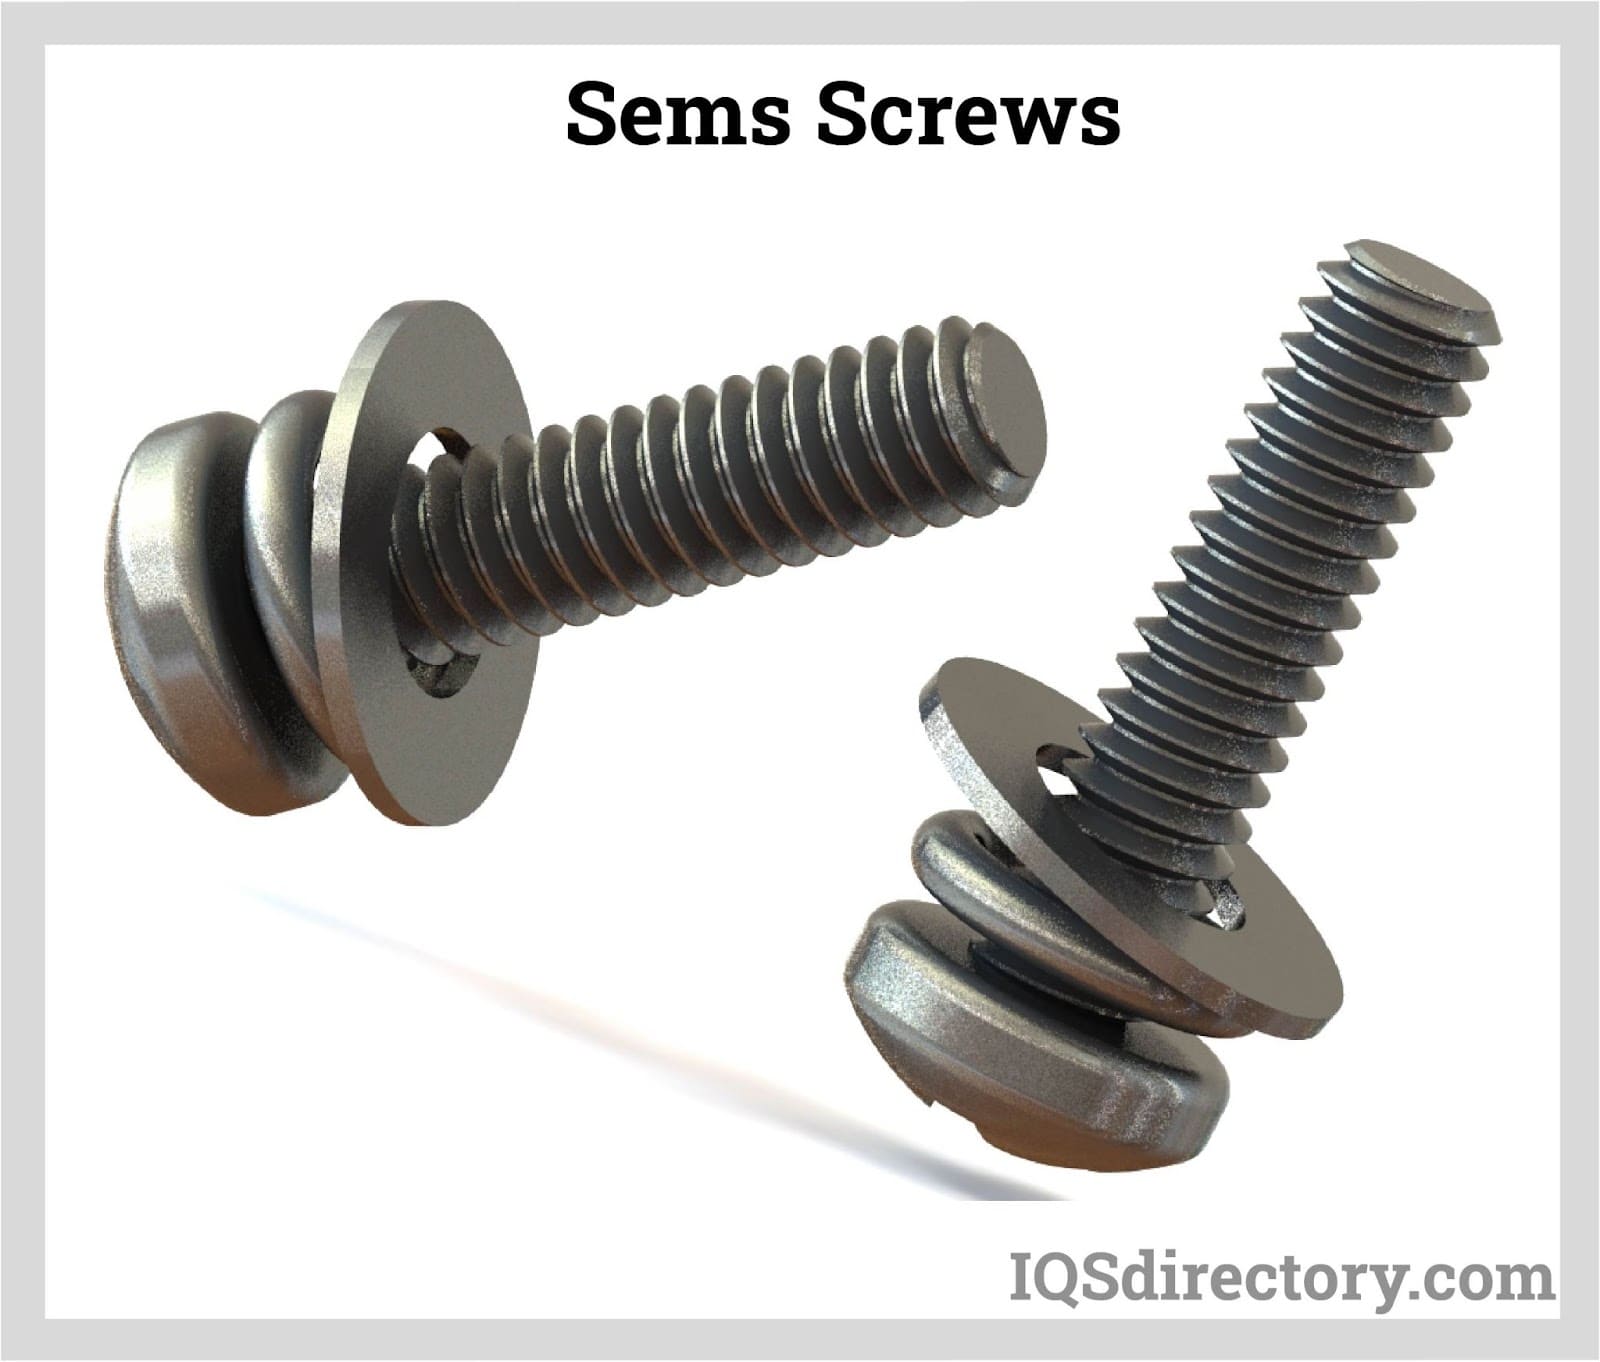 Nail screw Black and White Stock Photos & Images - Alamy